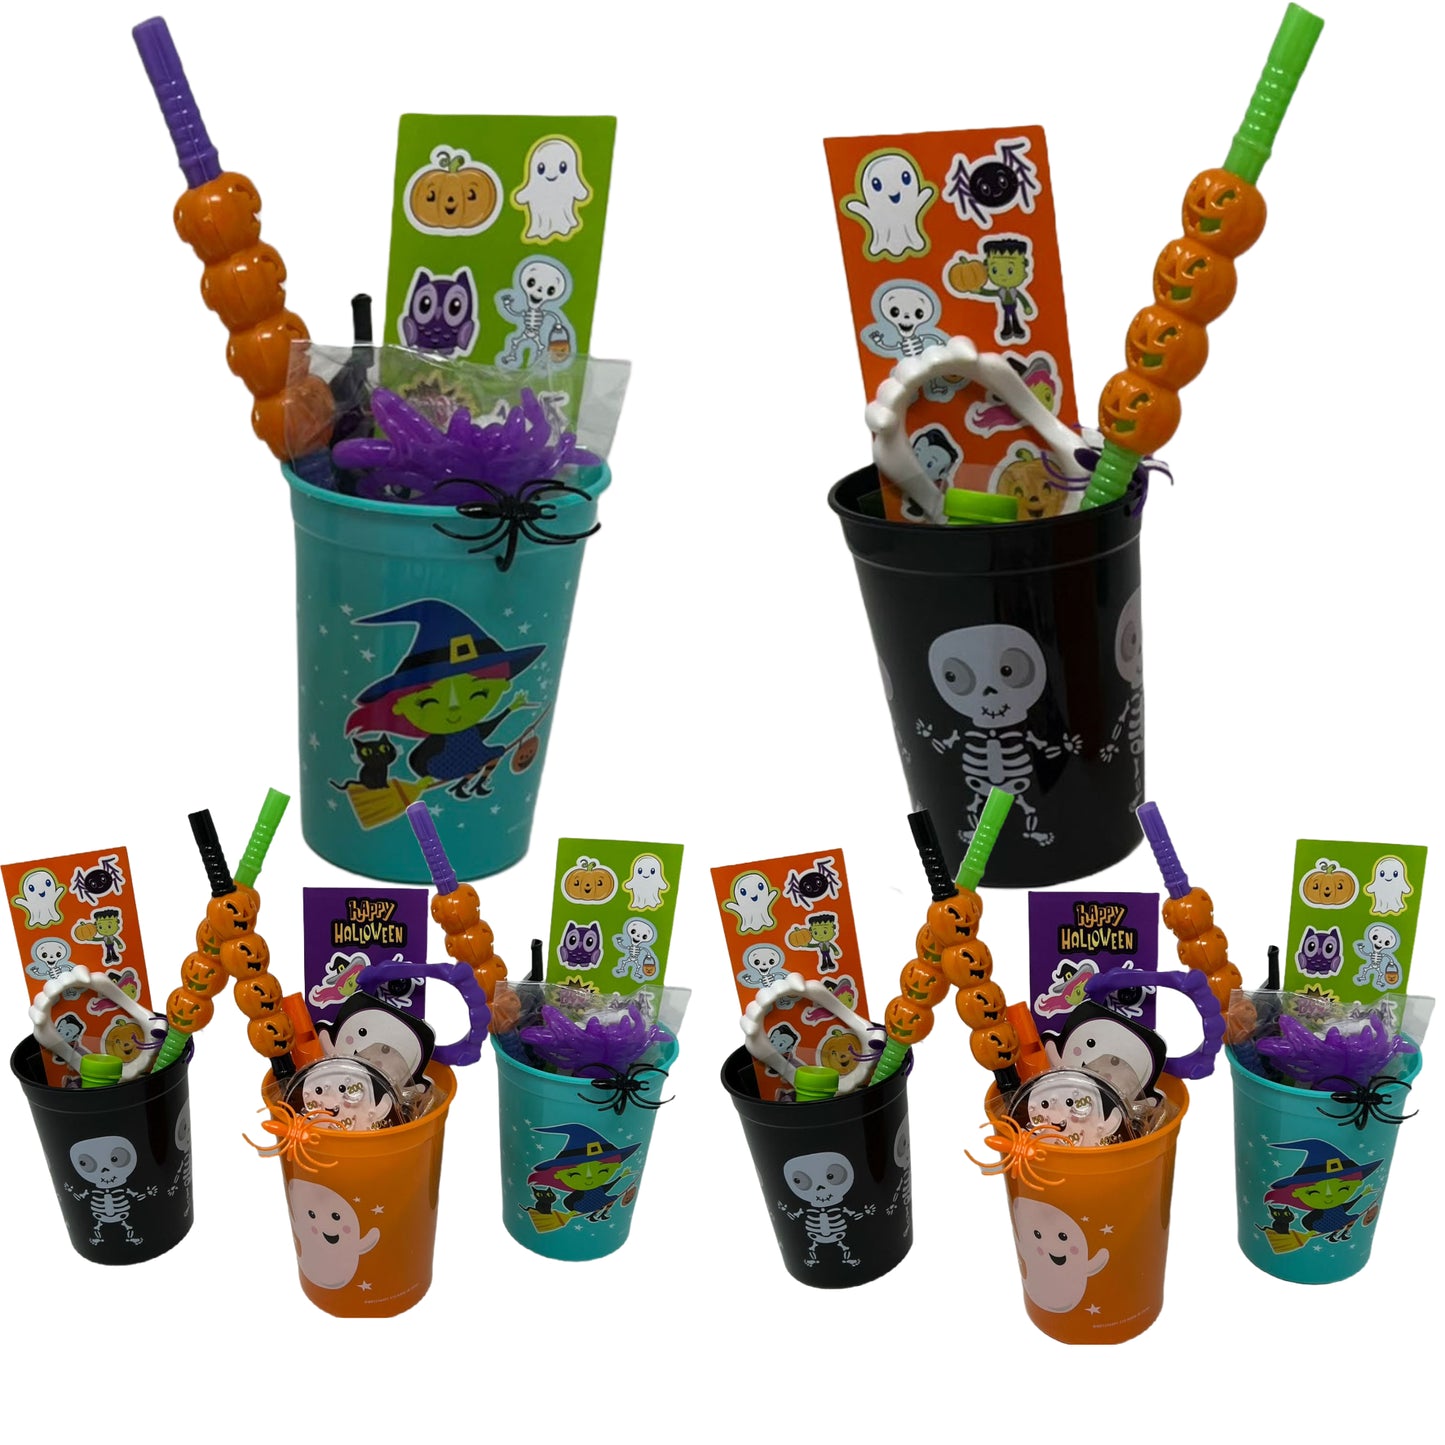 Cup-O-Treats Bundle, 8 Cups with Novelty Party Favors